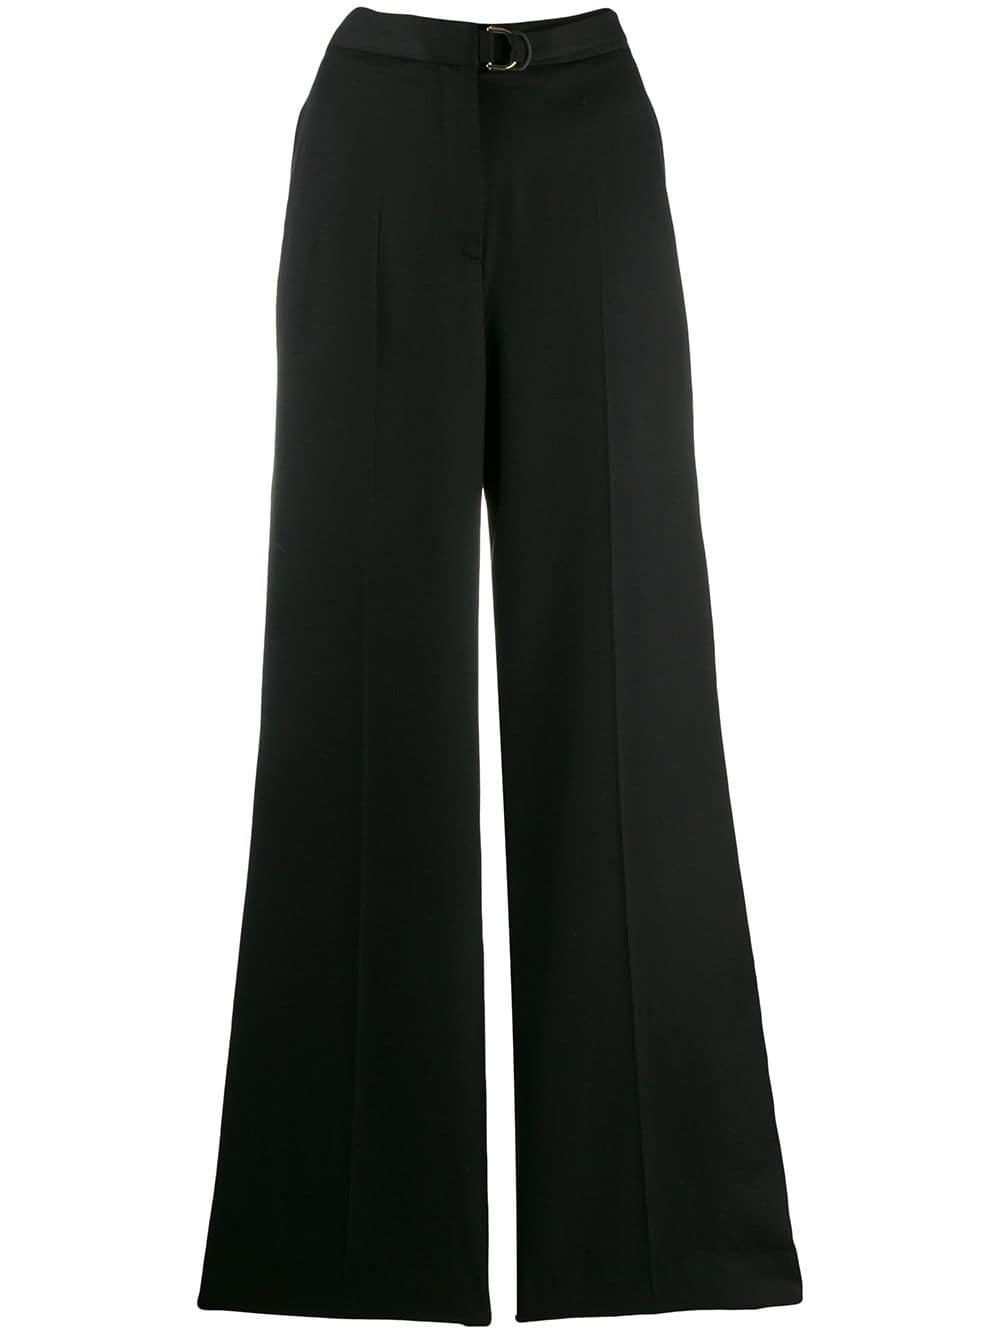 Sandro Cotton Roxanne Loose-fit Trousers in Black - Lyst